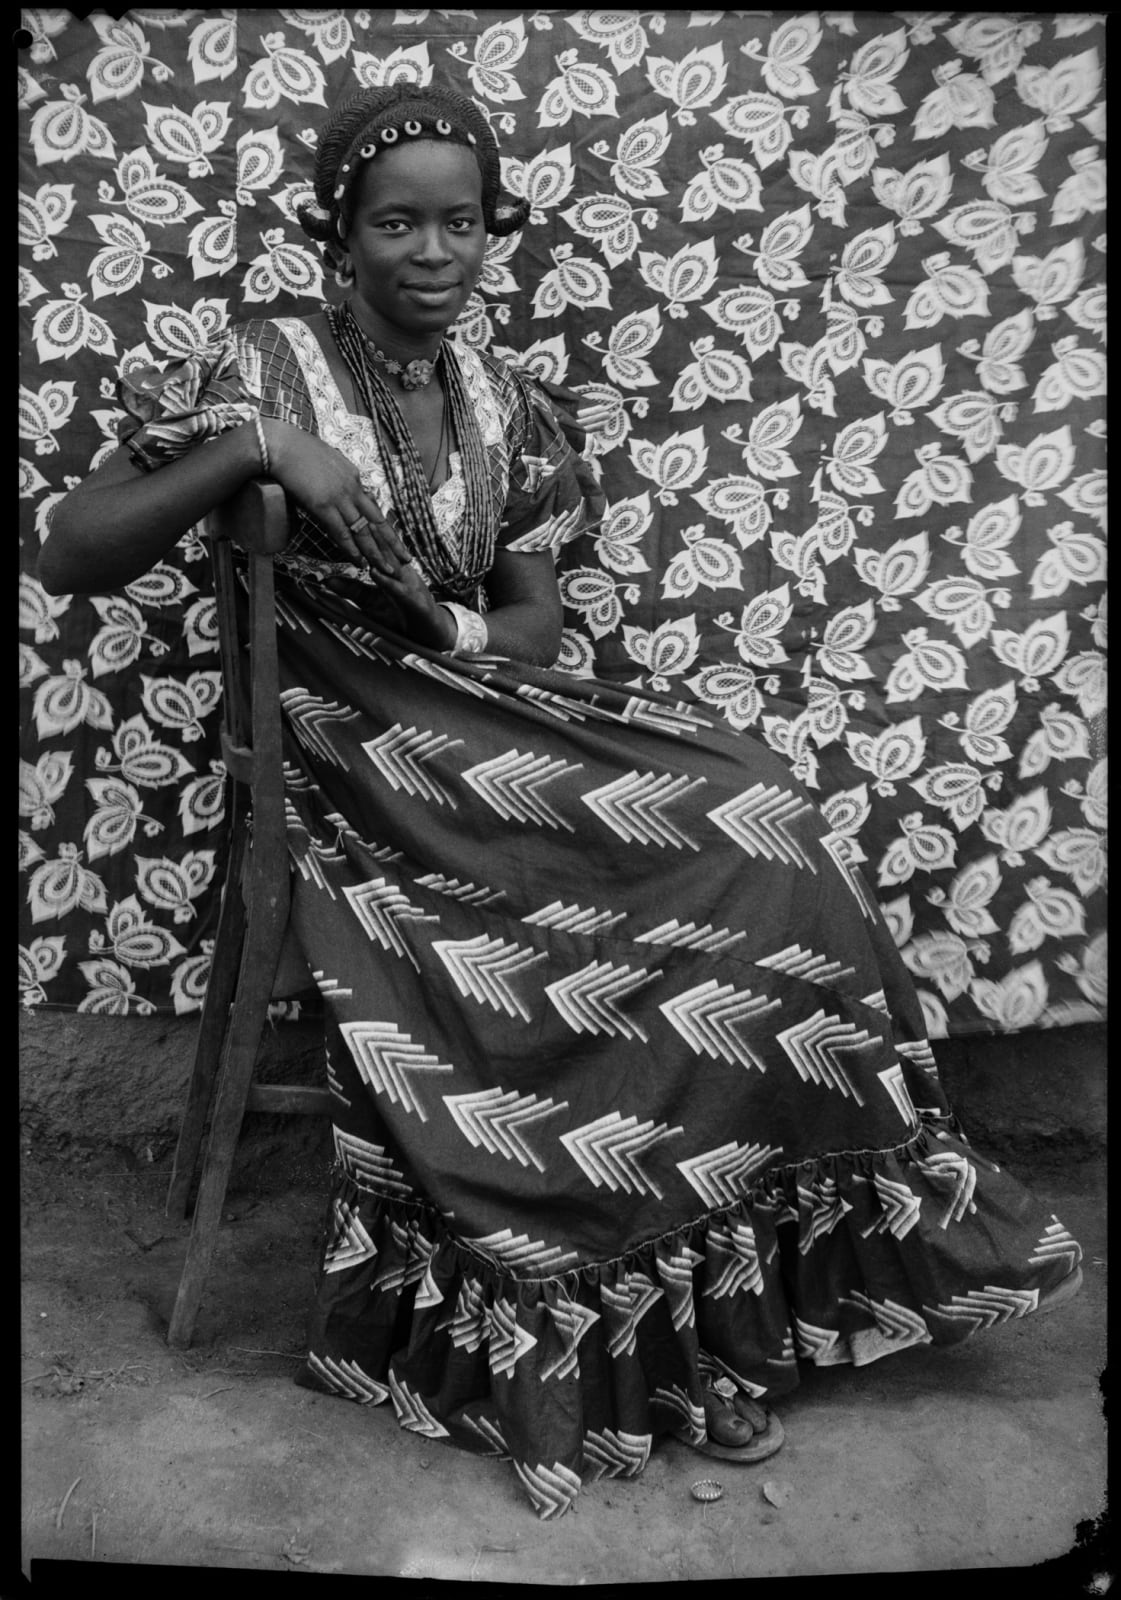 Seydou Keïta Sans titre/ Untitled (00111-MA.KE.278), 1959 Posthumous Gelatin black and white silver print on cartoline paper 280g 60 x 50 cm (23 5/8 x 19 5/8 in.) Edition of 10 + 2 AP Posthumous Gelatin black and white silver print on cartoline paper 280g back-mounted on Aluminium 1mm 162 x 122 cm (63 25/32 x 48 1/32 in) Edition of 5 + 2 AP